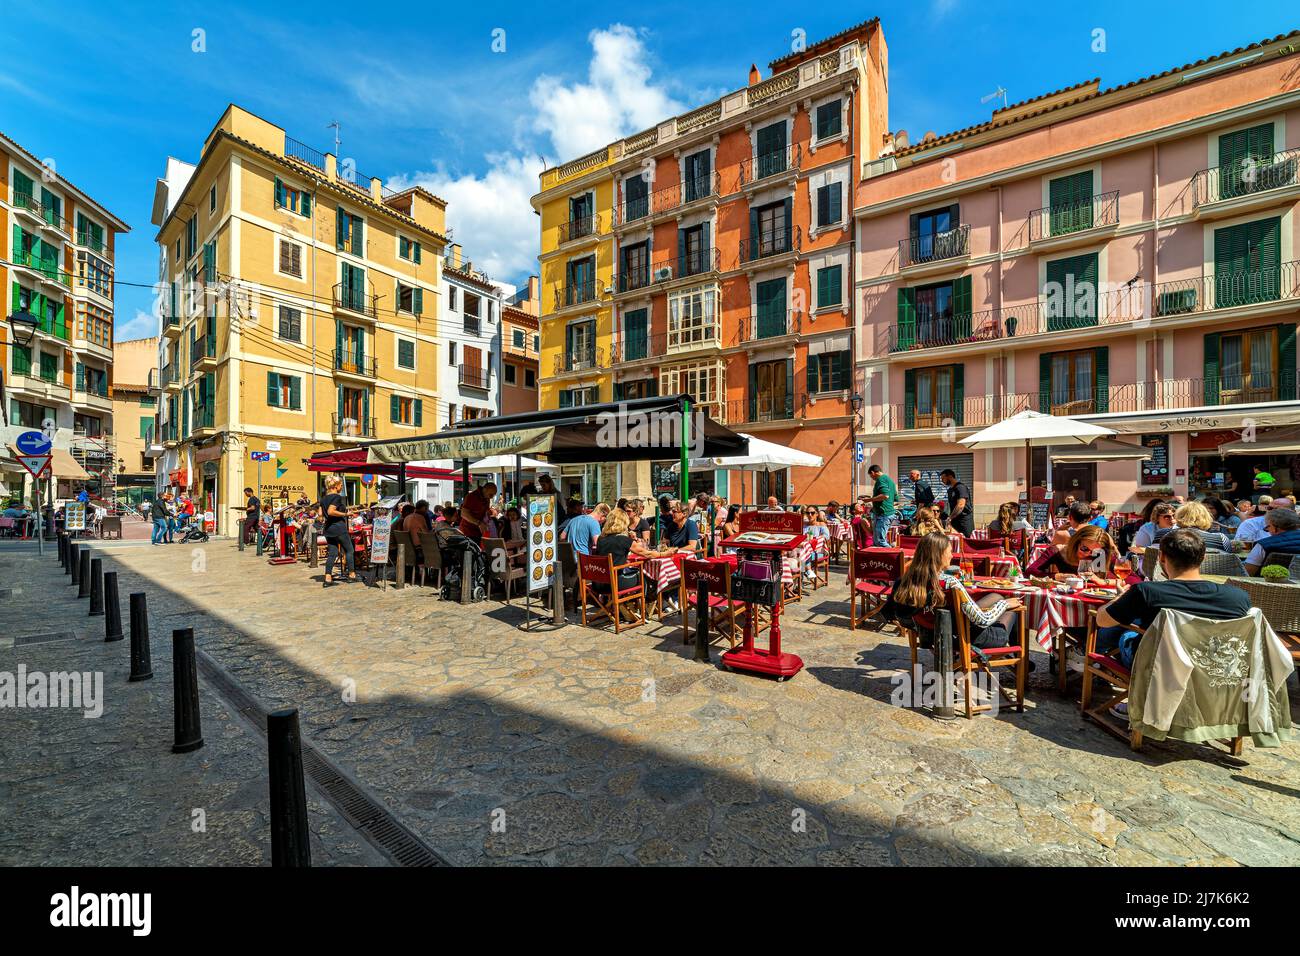 People sitting in outdoor restaurants on small town square in old historic part of Palma de Mallorca, Spain. Stock Photo